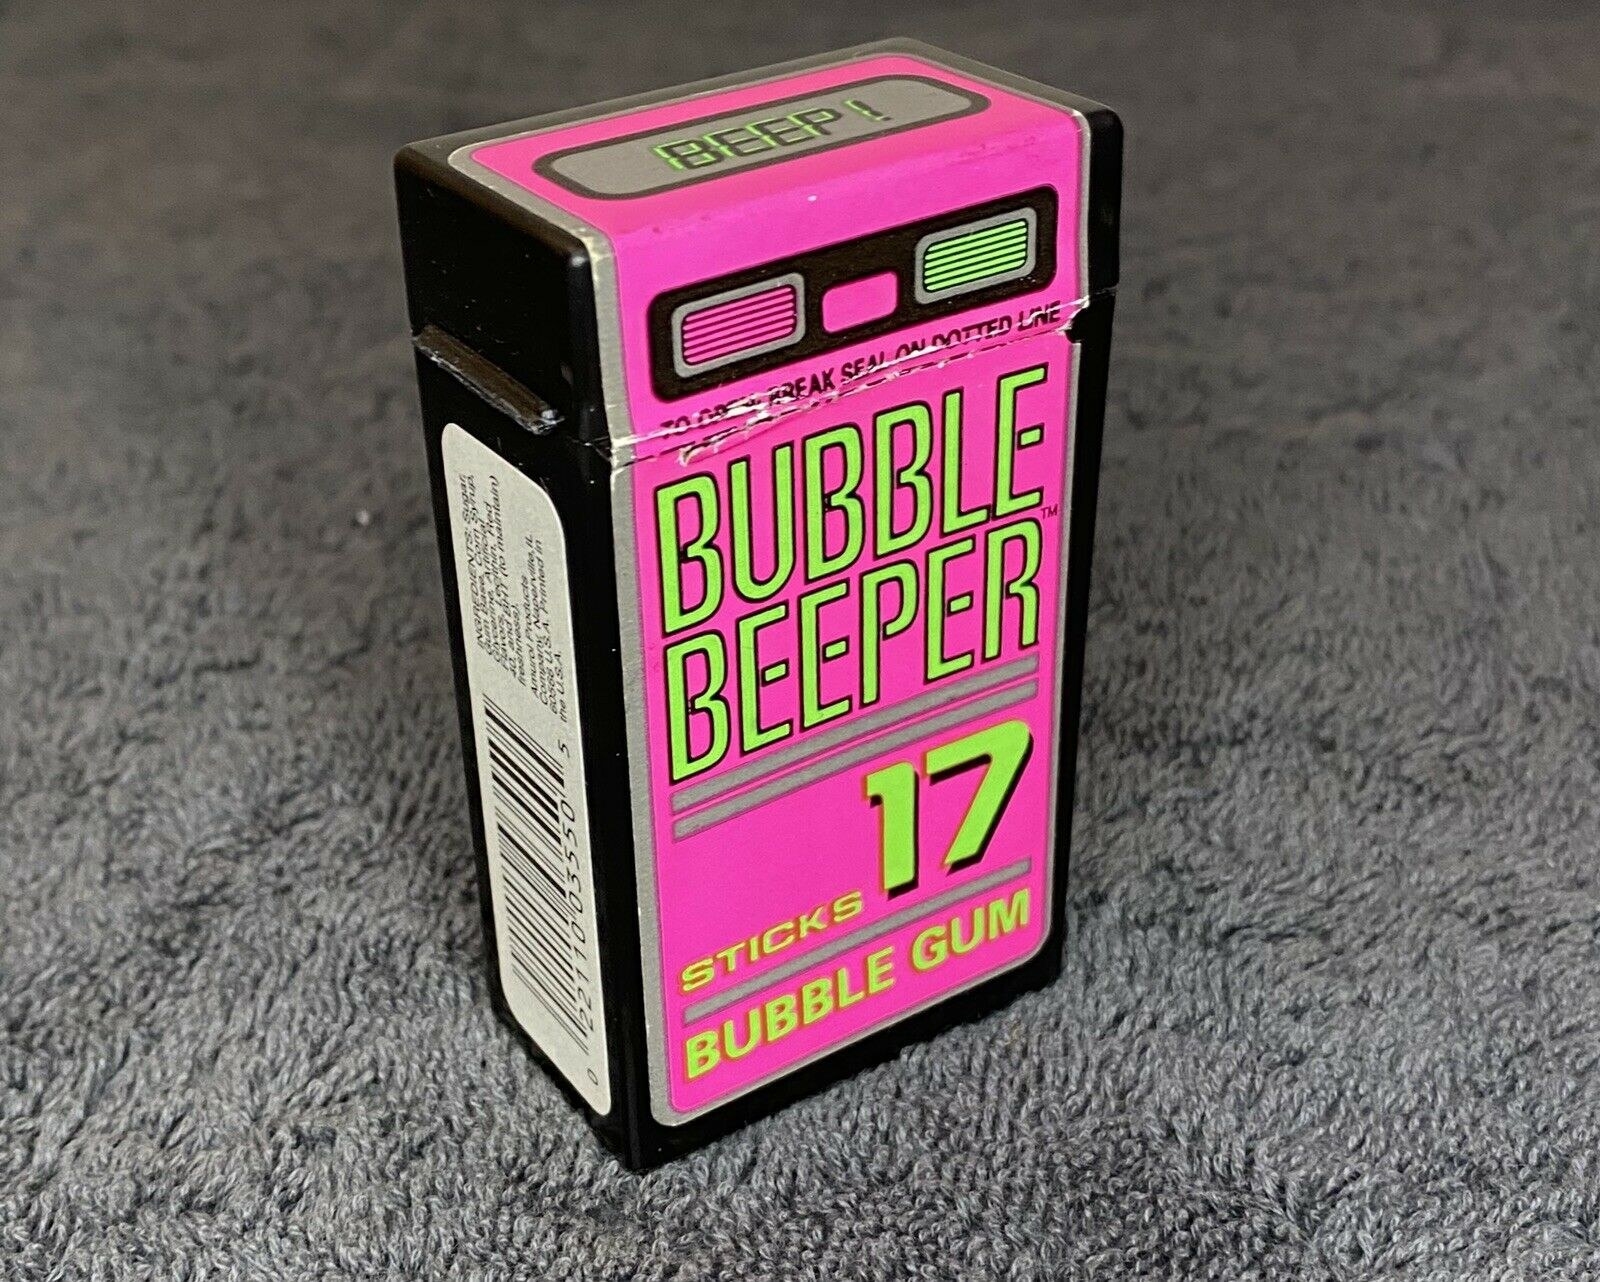 The black and pink case for Bubble Beeper